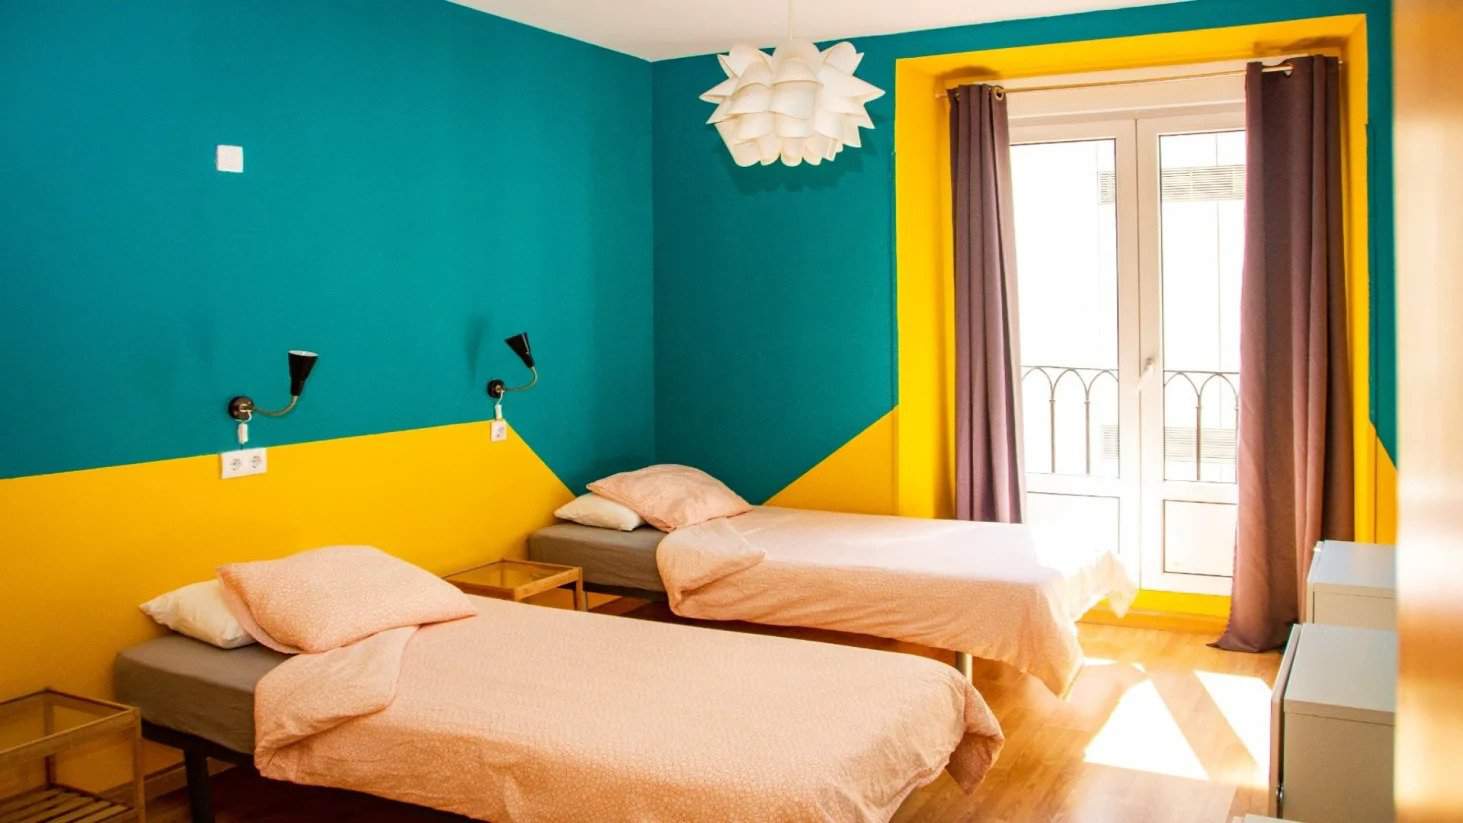 Two twin beds in a brightly painted room at Sungate One hostel in Madrid, Spain.